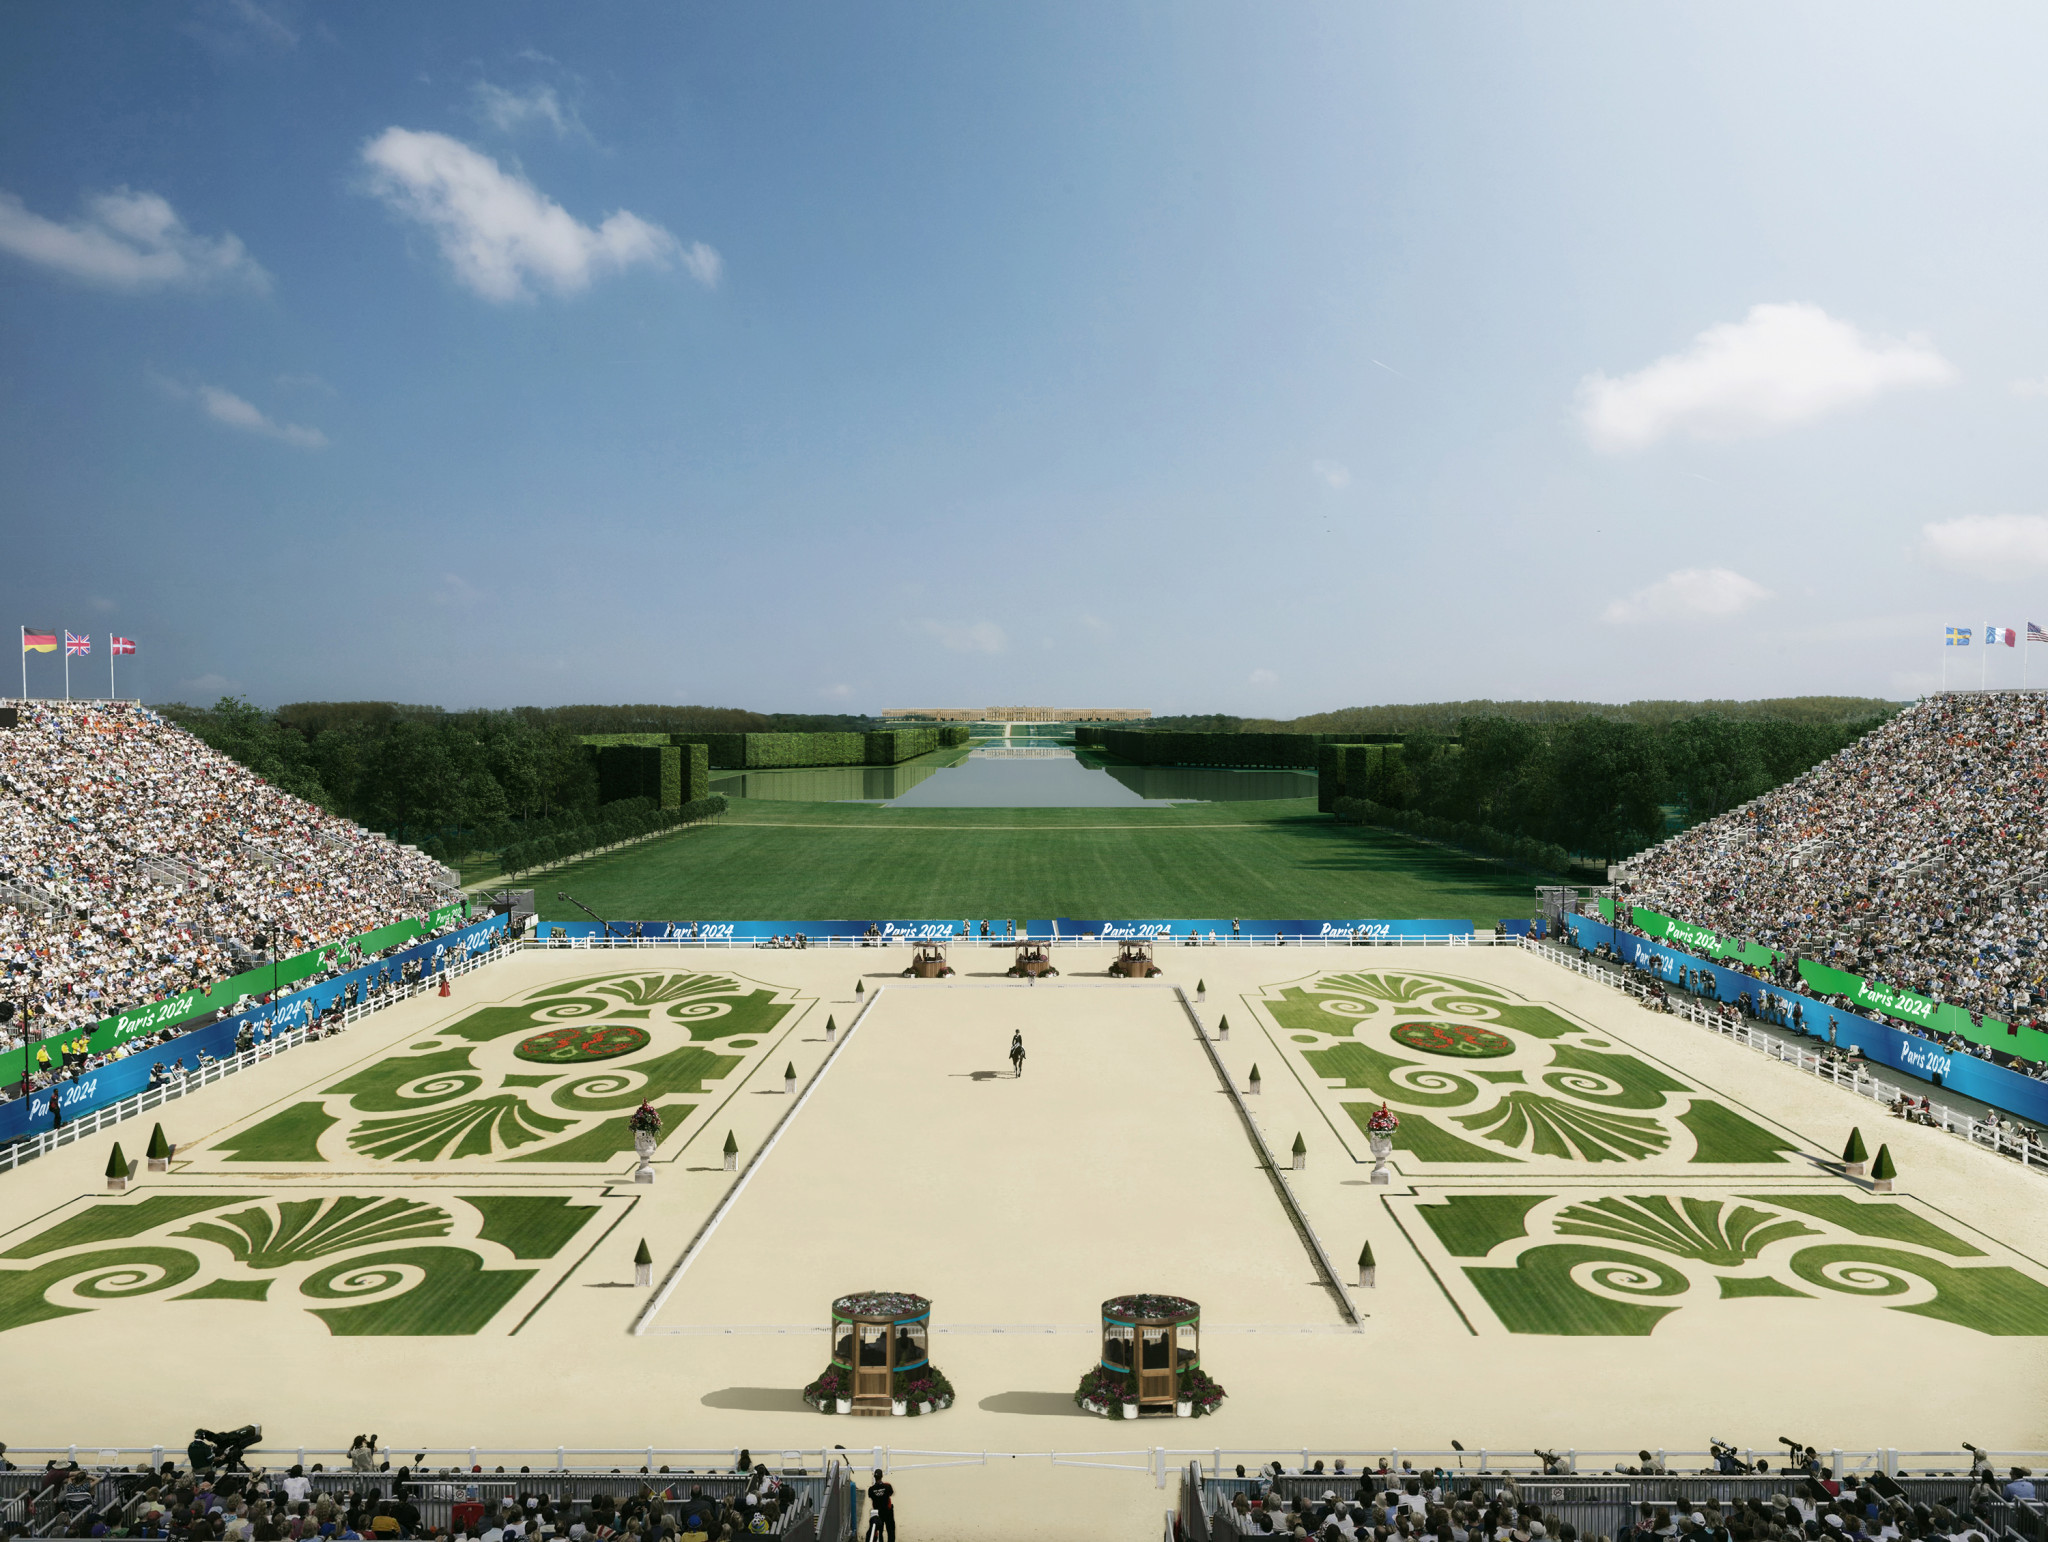 Equestrian will remain in Versailles after Paris 2024 confirmed the venue for the sport ©Paris 2024